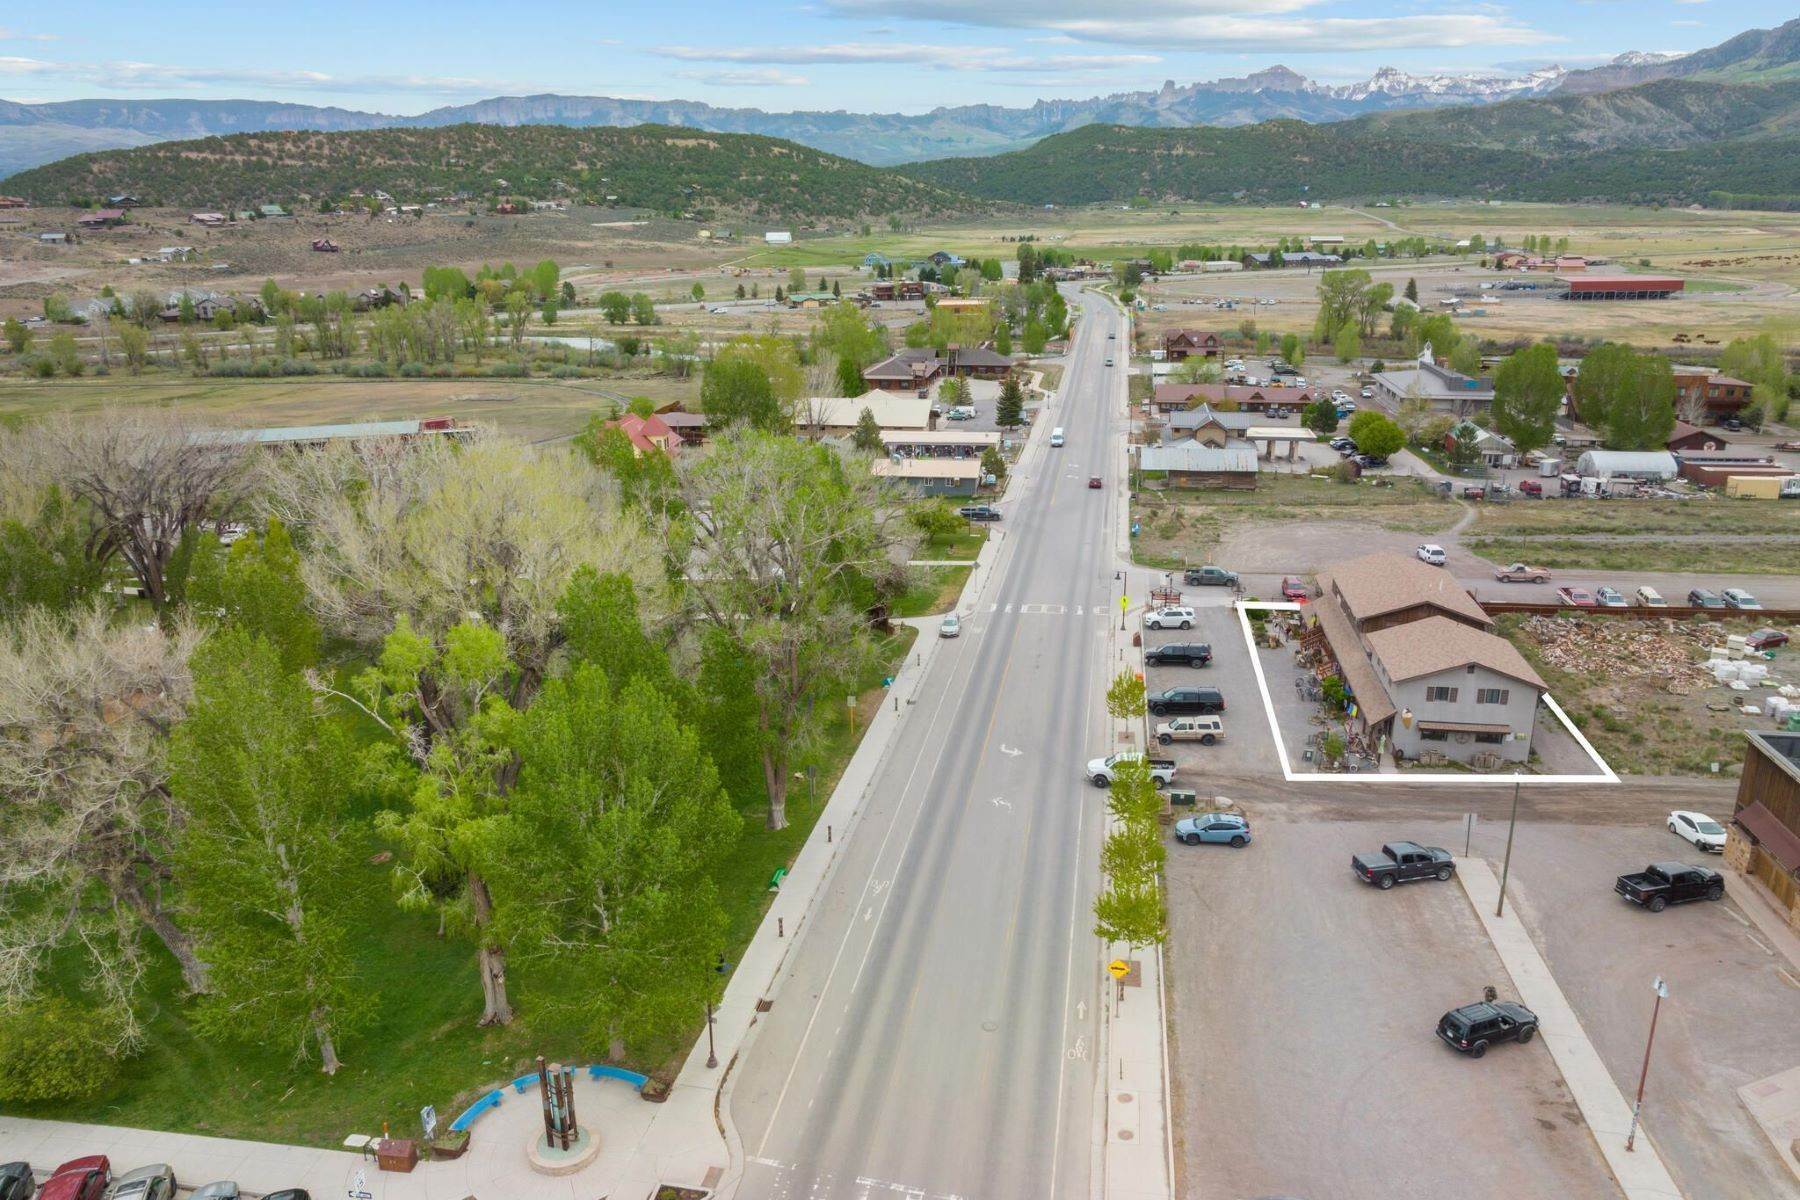 35. Property for Active at 380 Sherman Street, Ridgway, CO 81432 380 Sherman Street Ridgway, Colorado 81432 United States